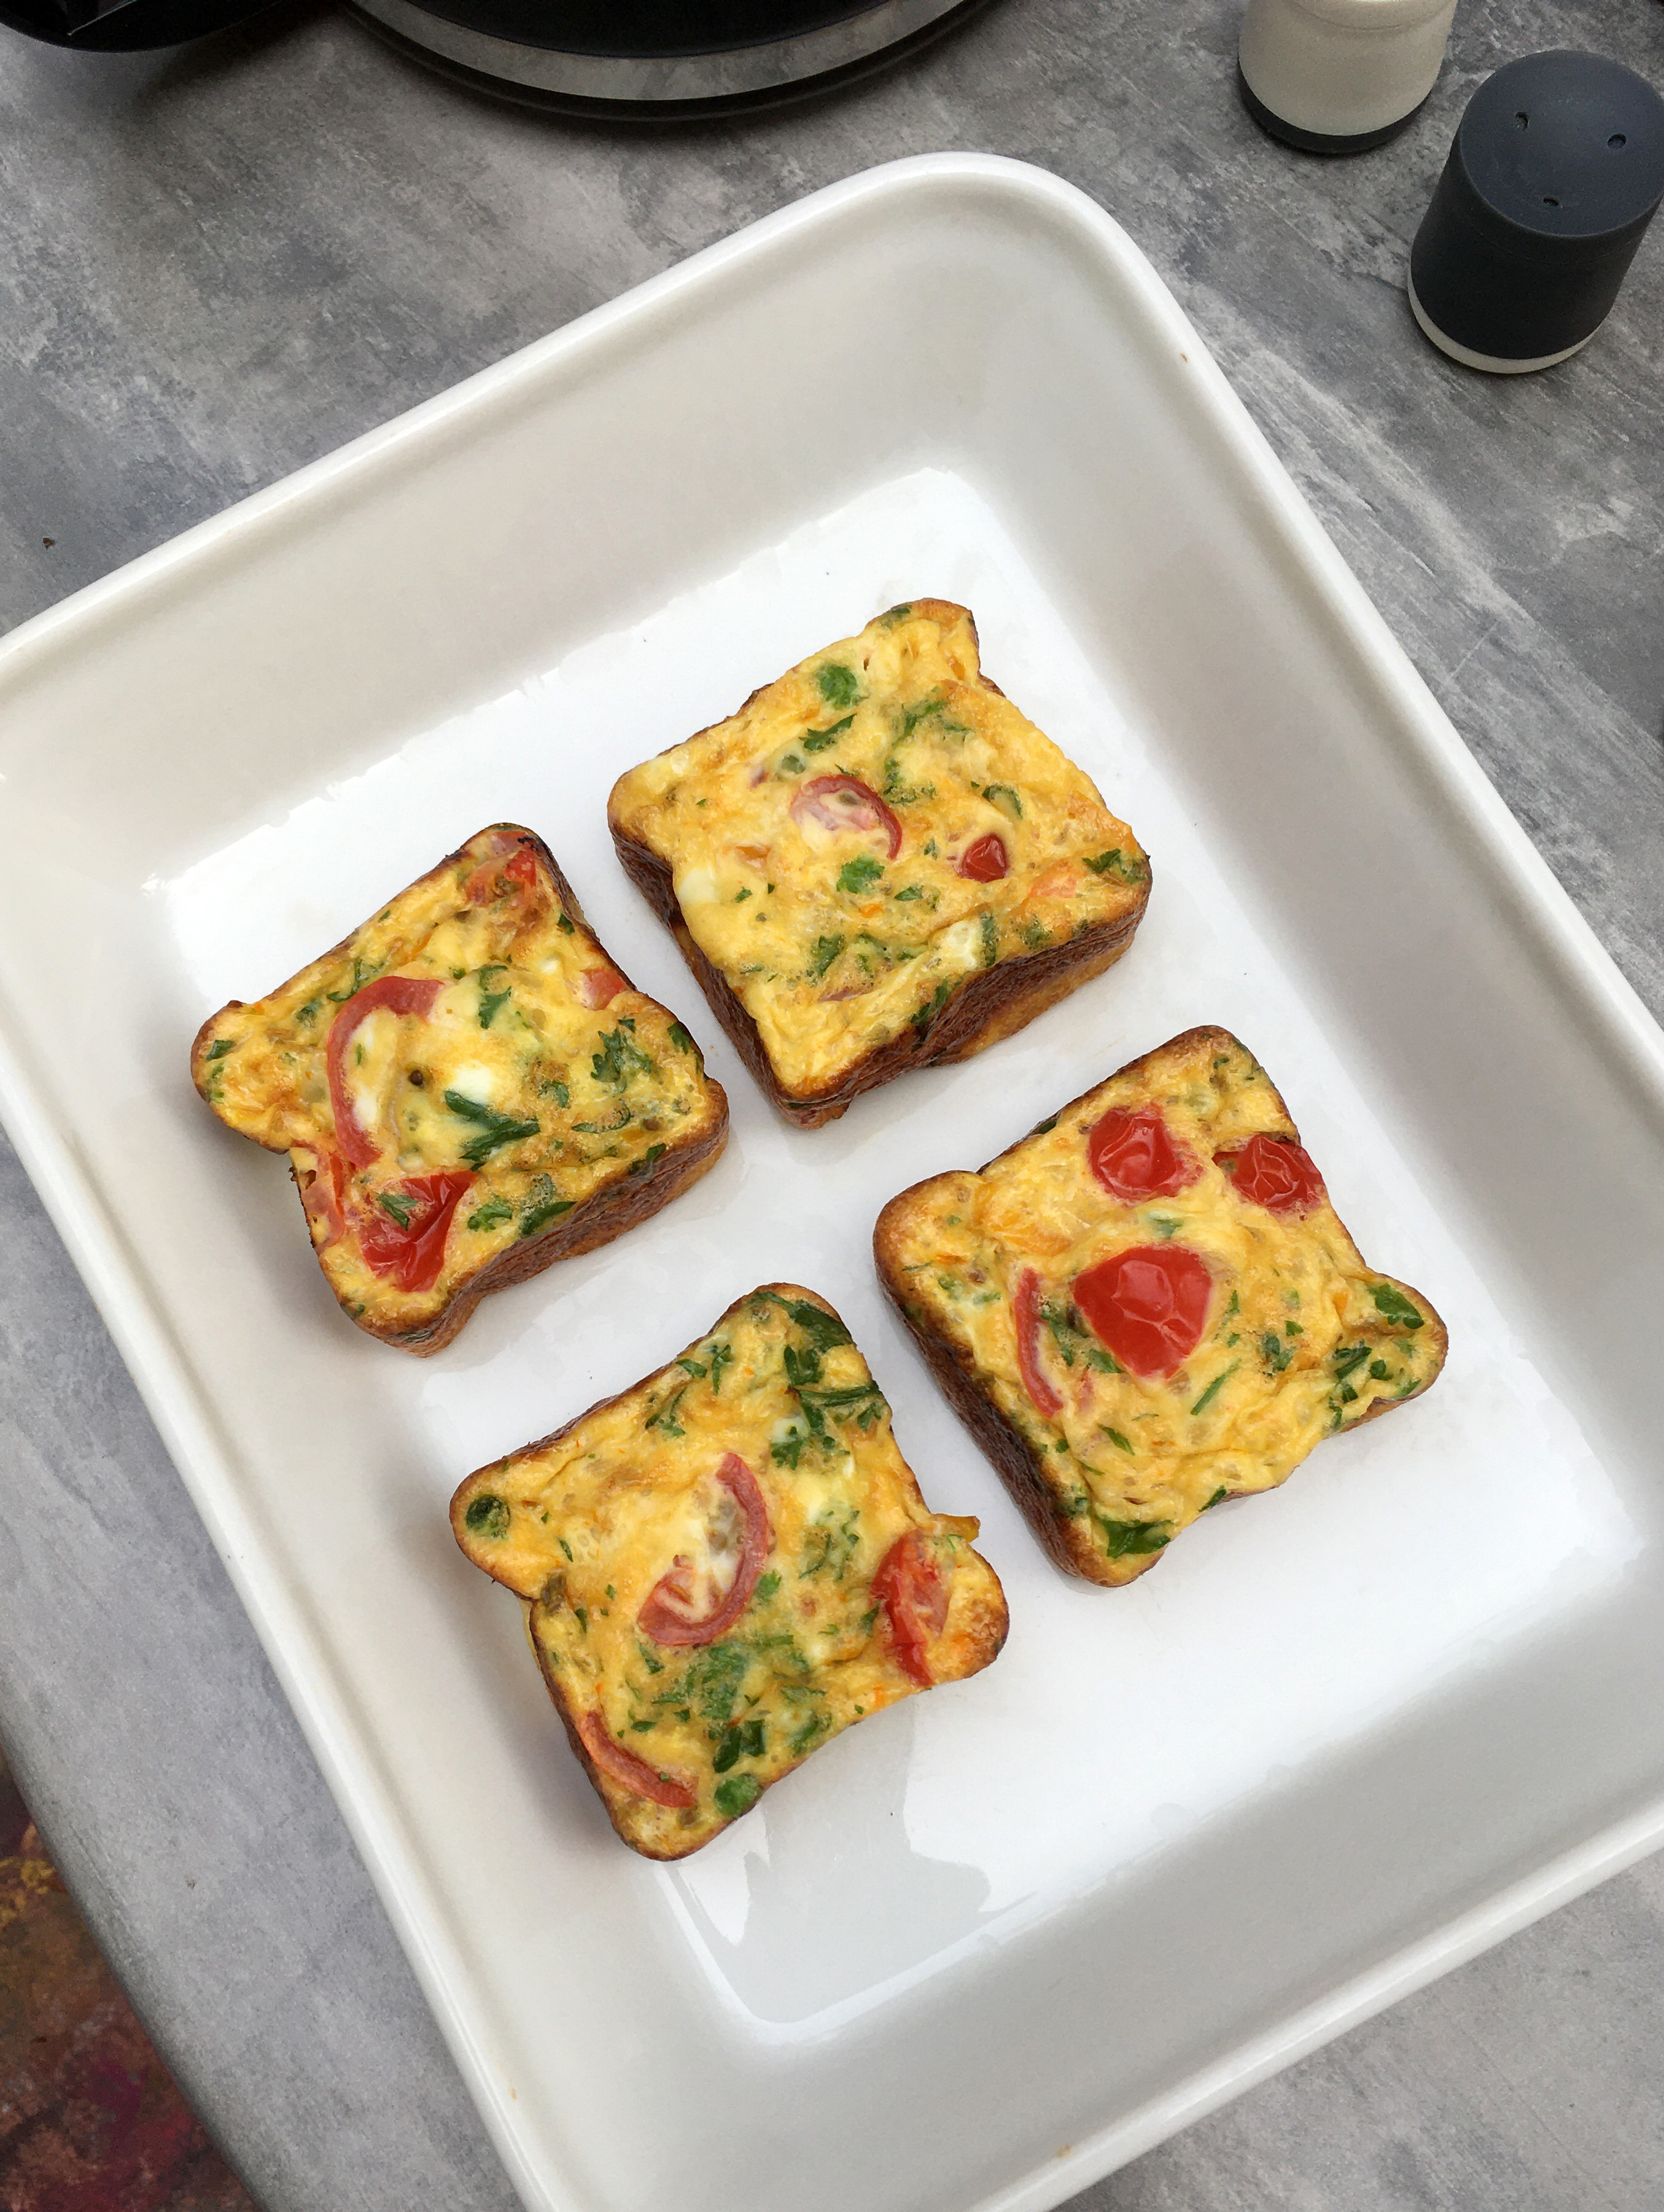 Four frittatas in the shape of bread slices